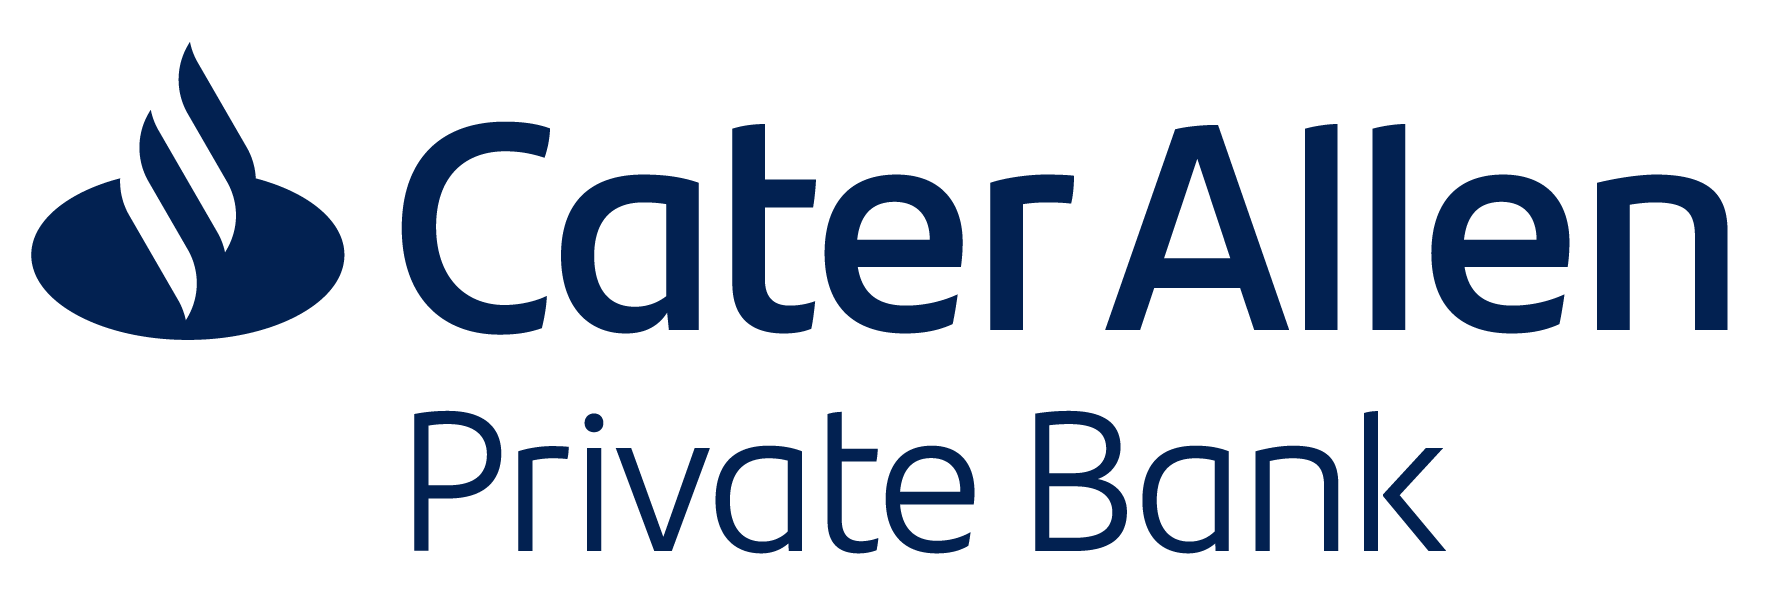 Cater Allen Private Bank